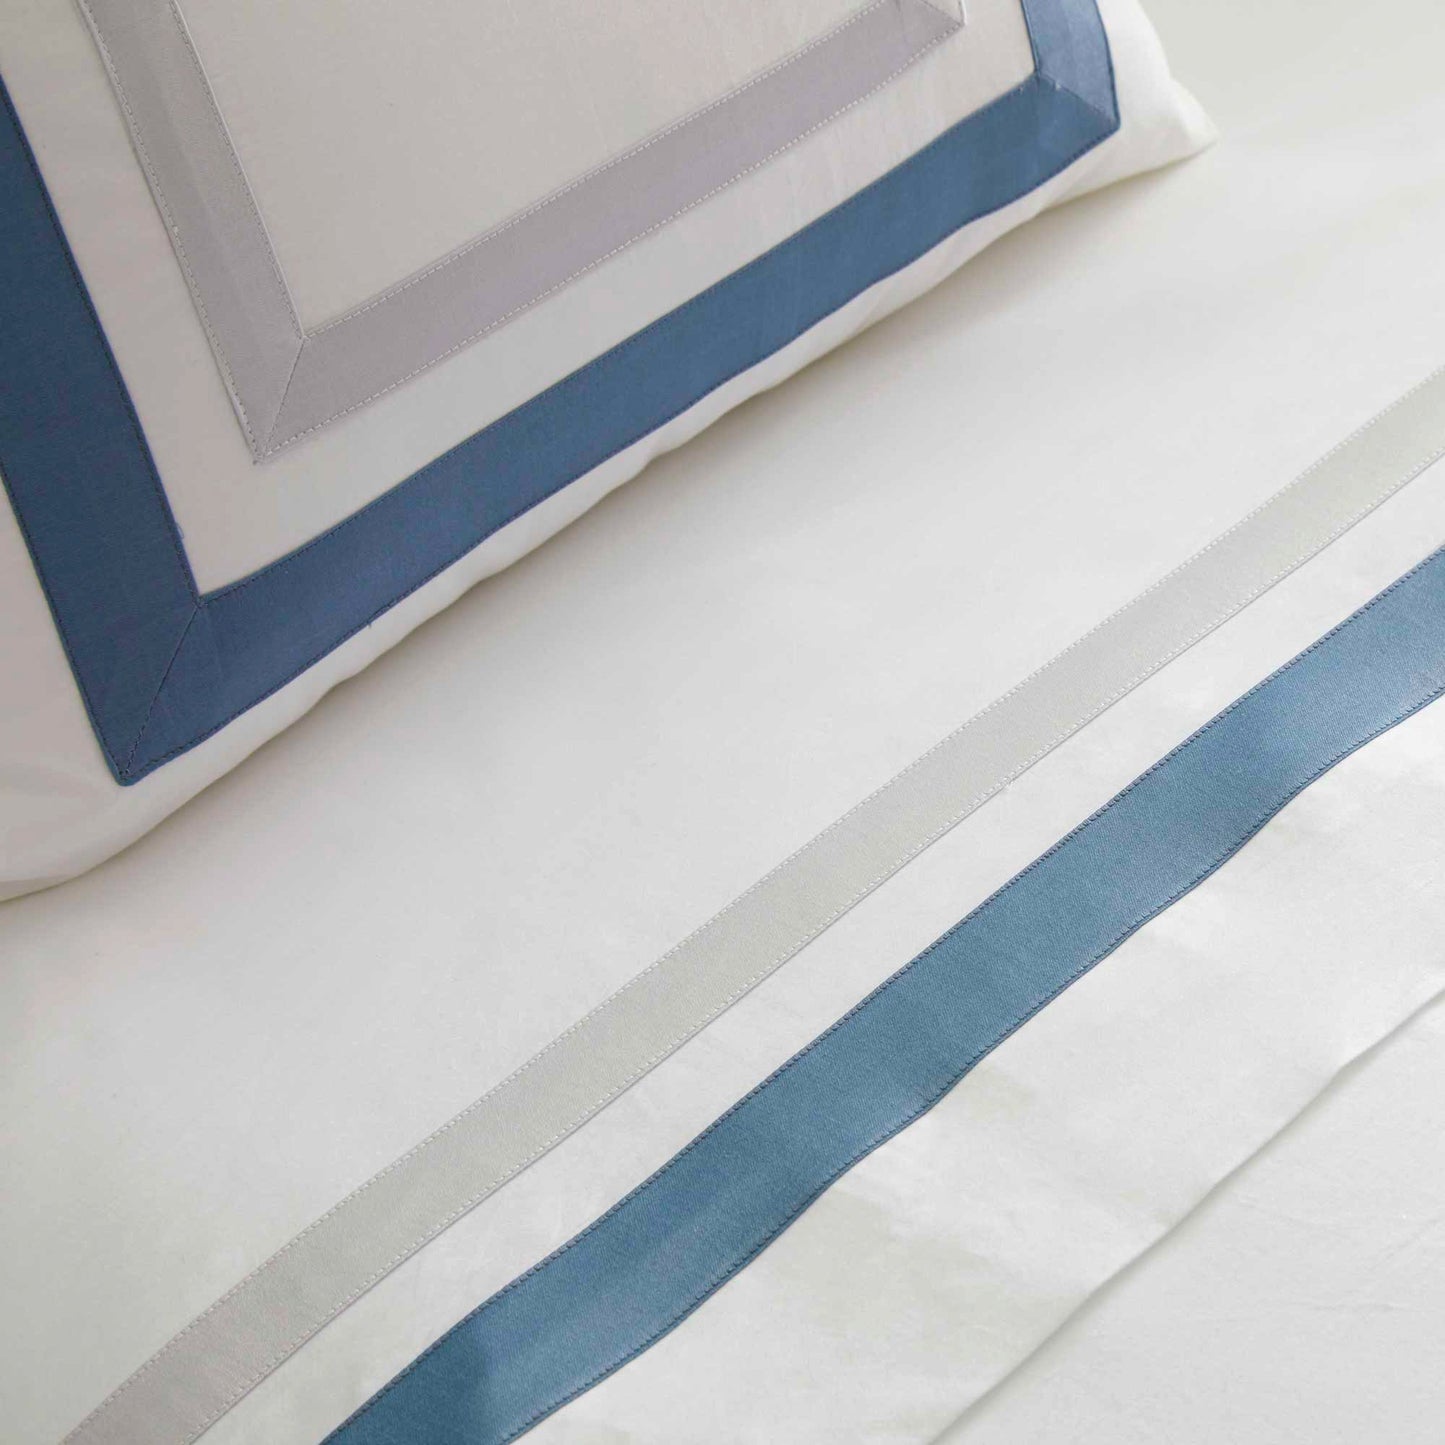 400TC Cotton Percale Sheet Set with Contrasting Satin Applications - Pure